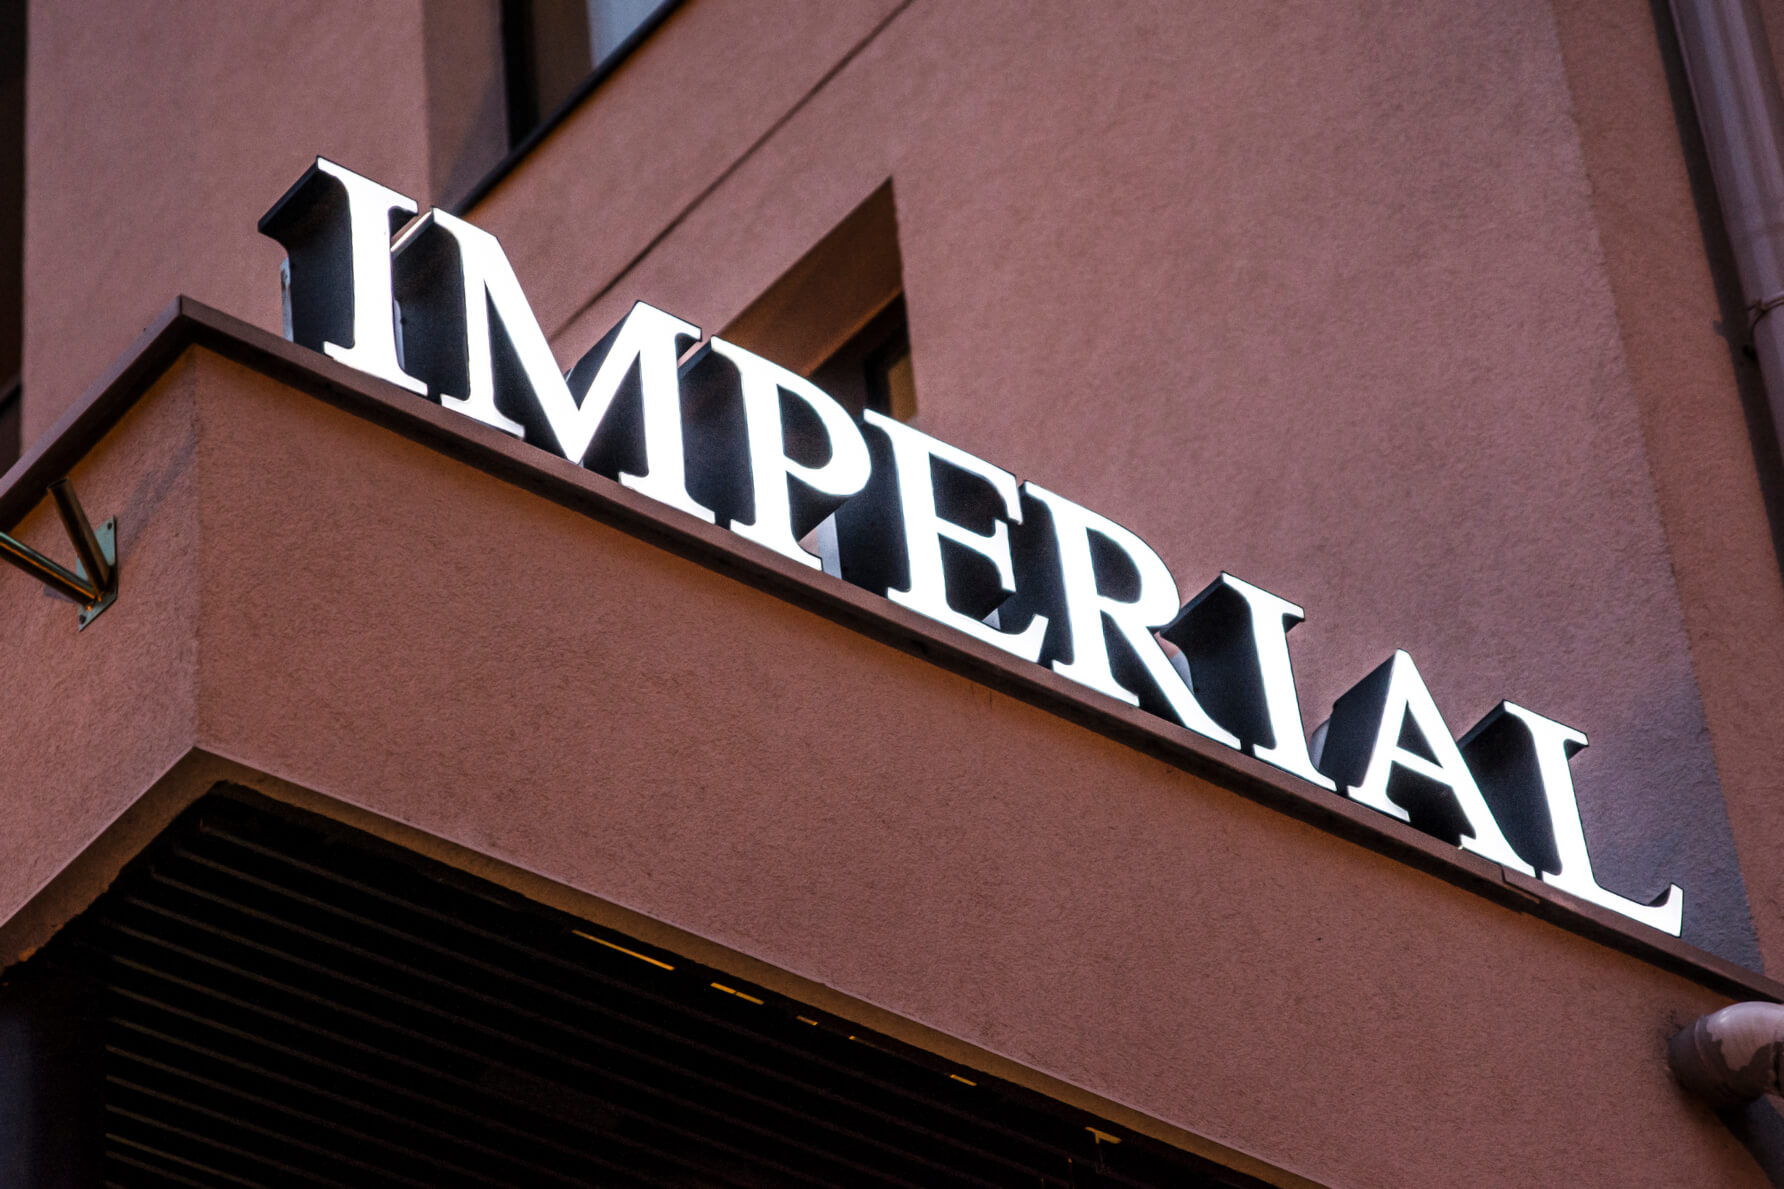 Imperial - Hotel Imperial - LED Spatial Lettering on the wall